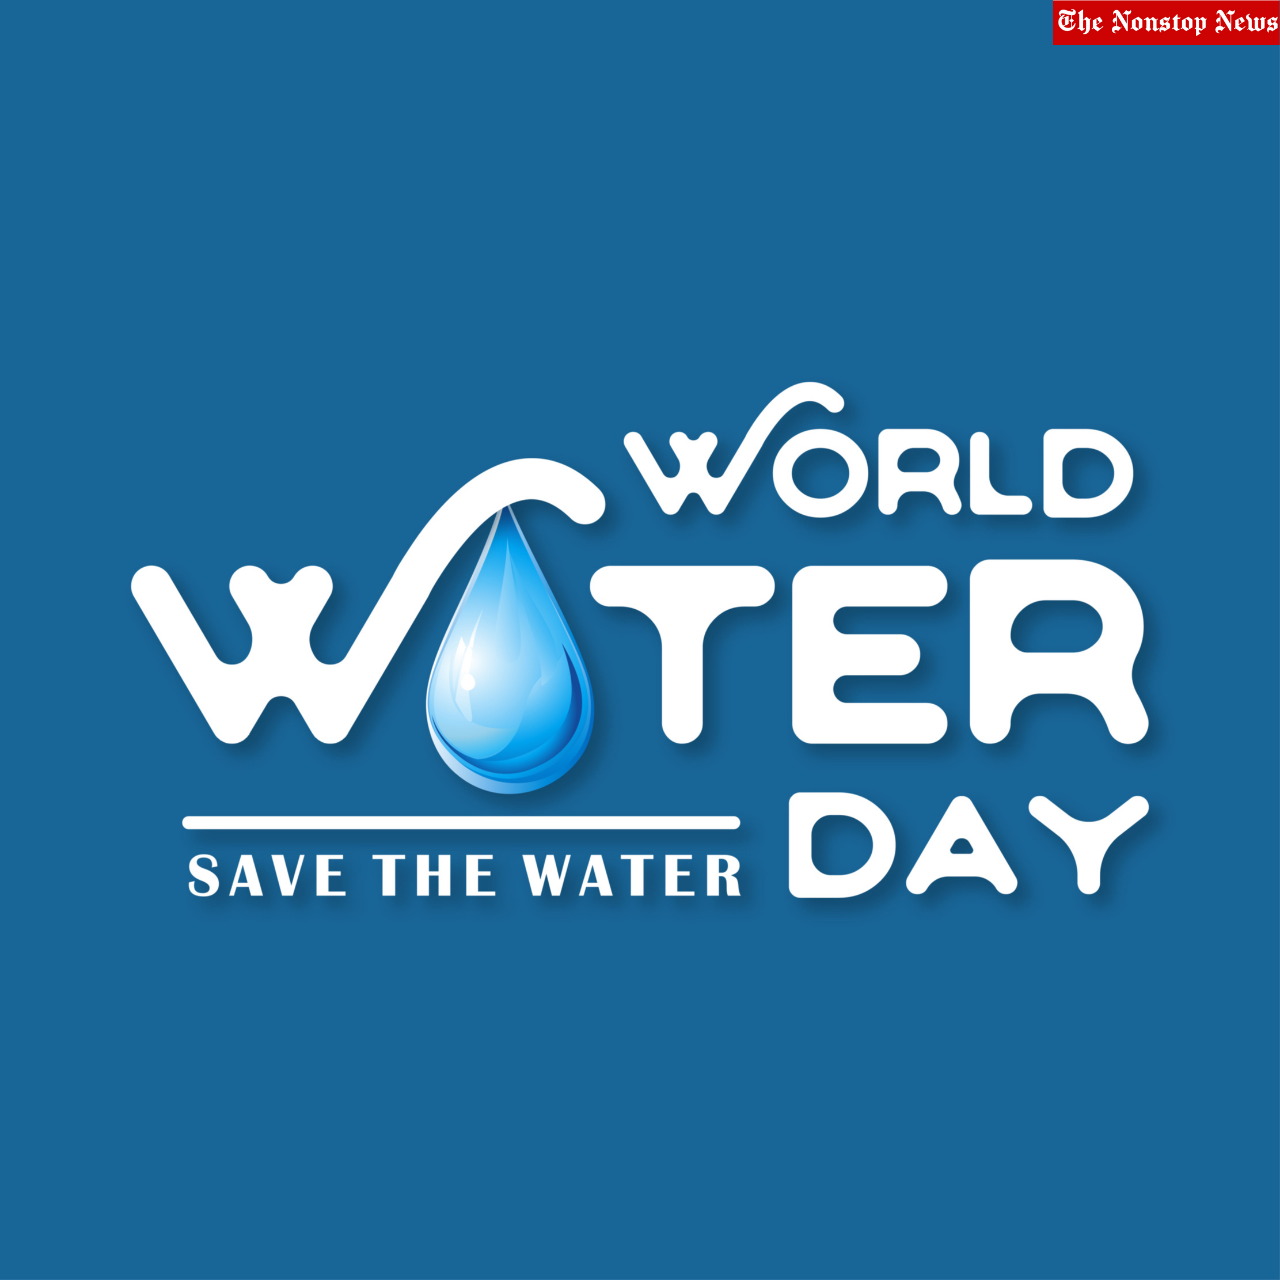 World Water Day 2022 Quotes, Posters, Banners, HD Images, Slogans to Create Awareness